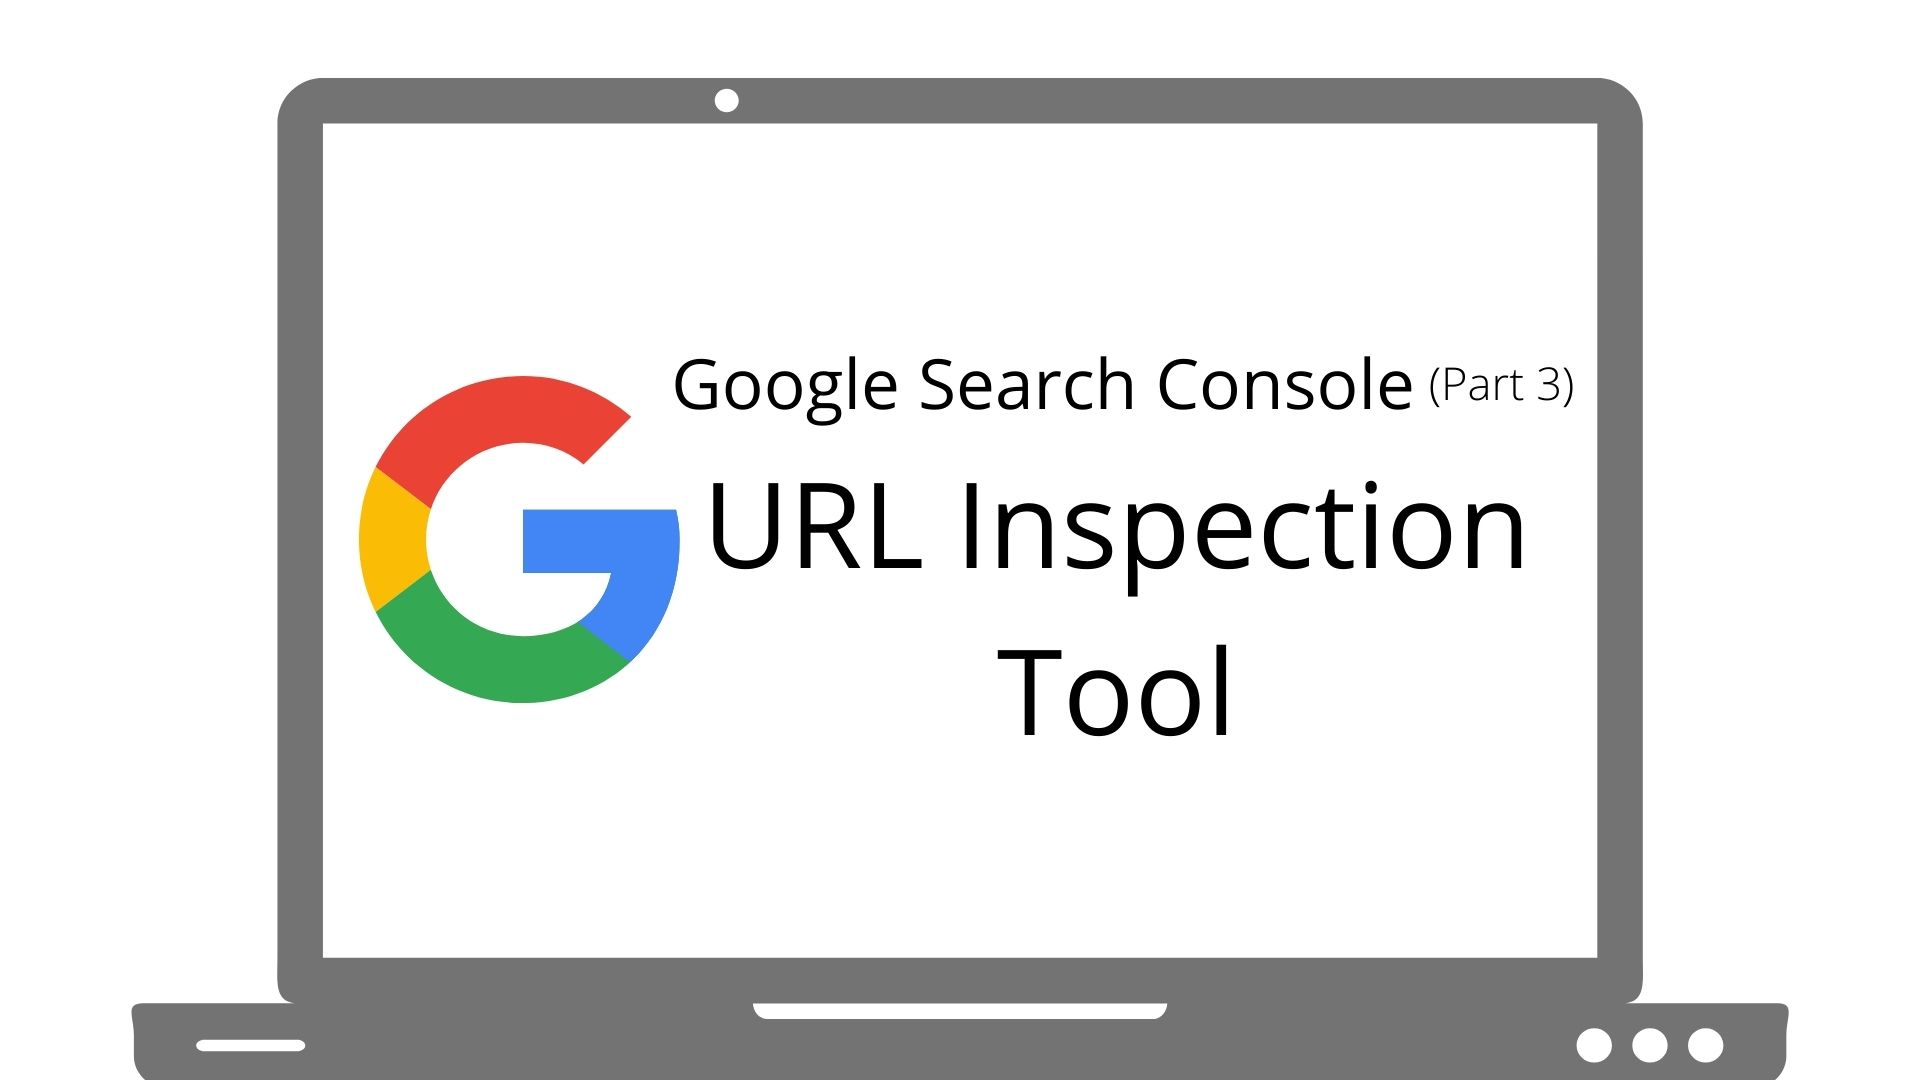 Google Search Console URL Inspection Tool advantage for webpages